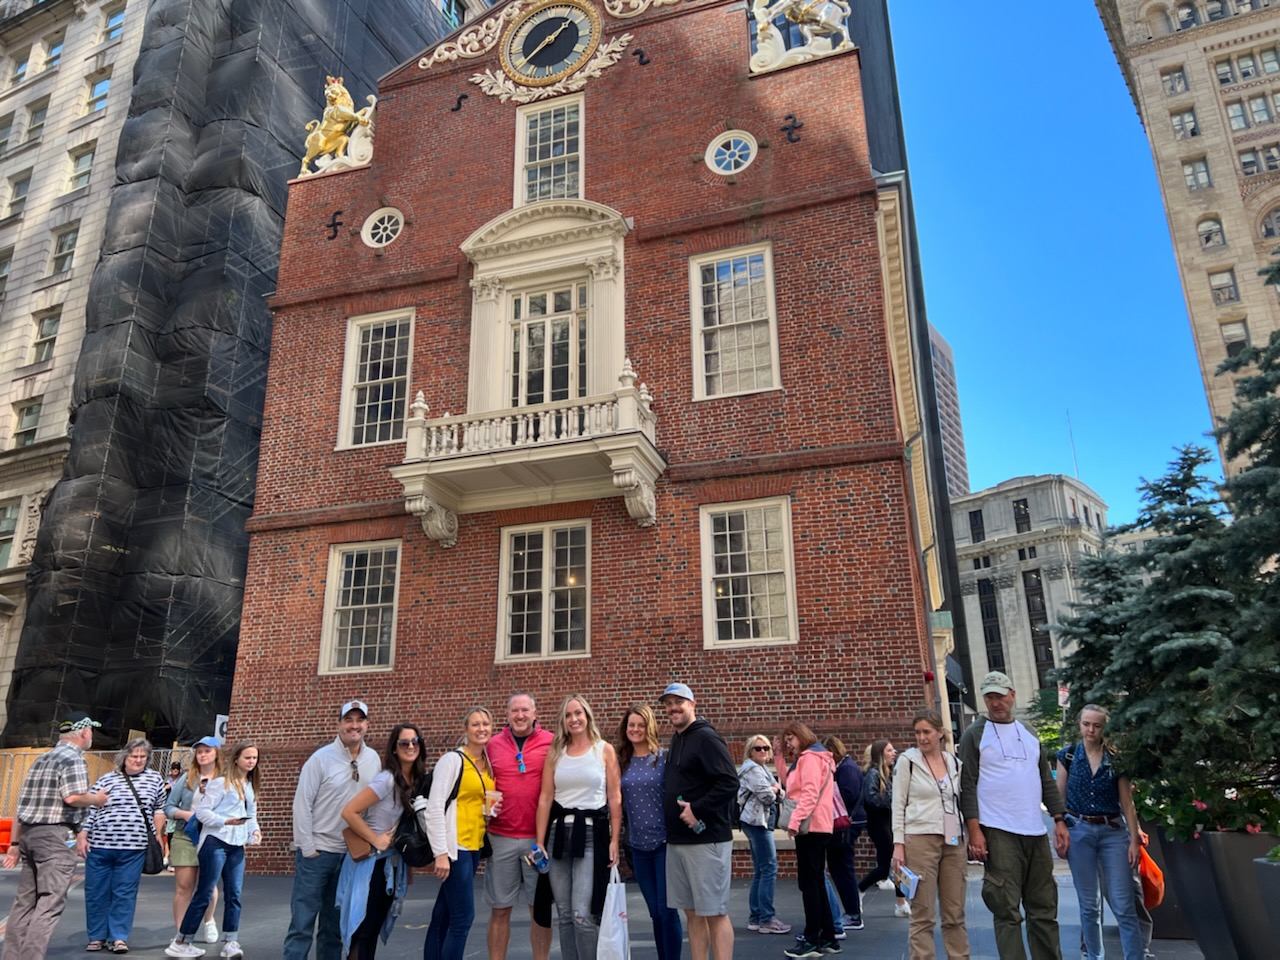 Group picture at the front of the Old State House in Boston, Massachusetts.